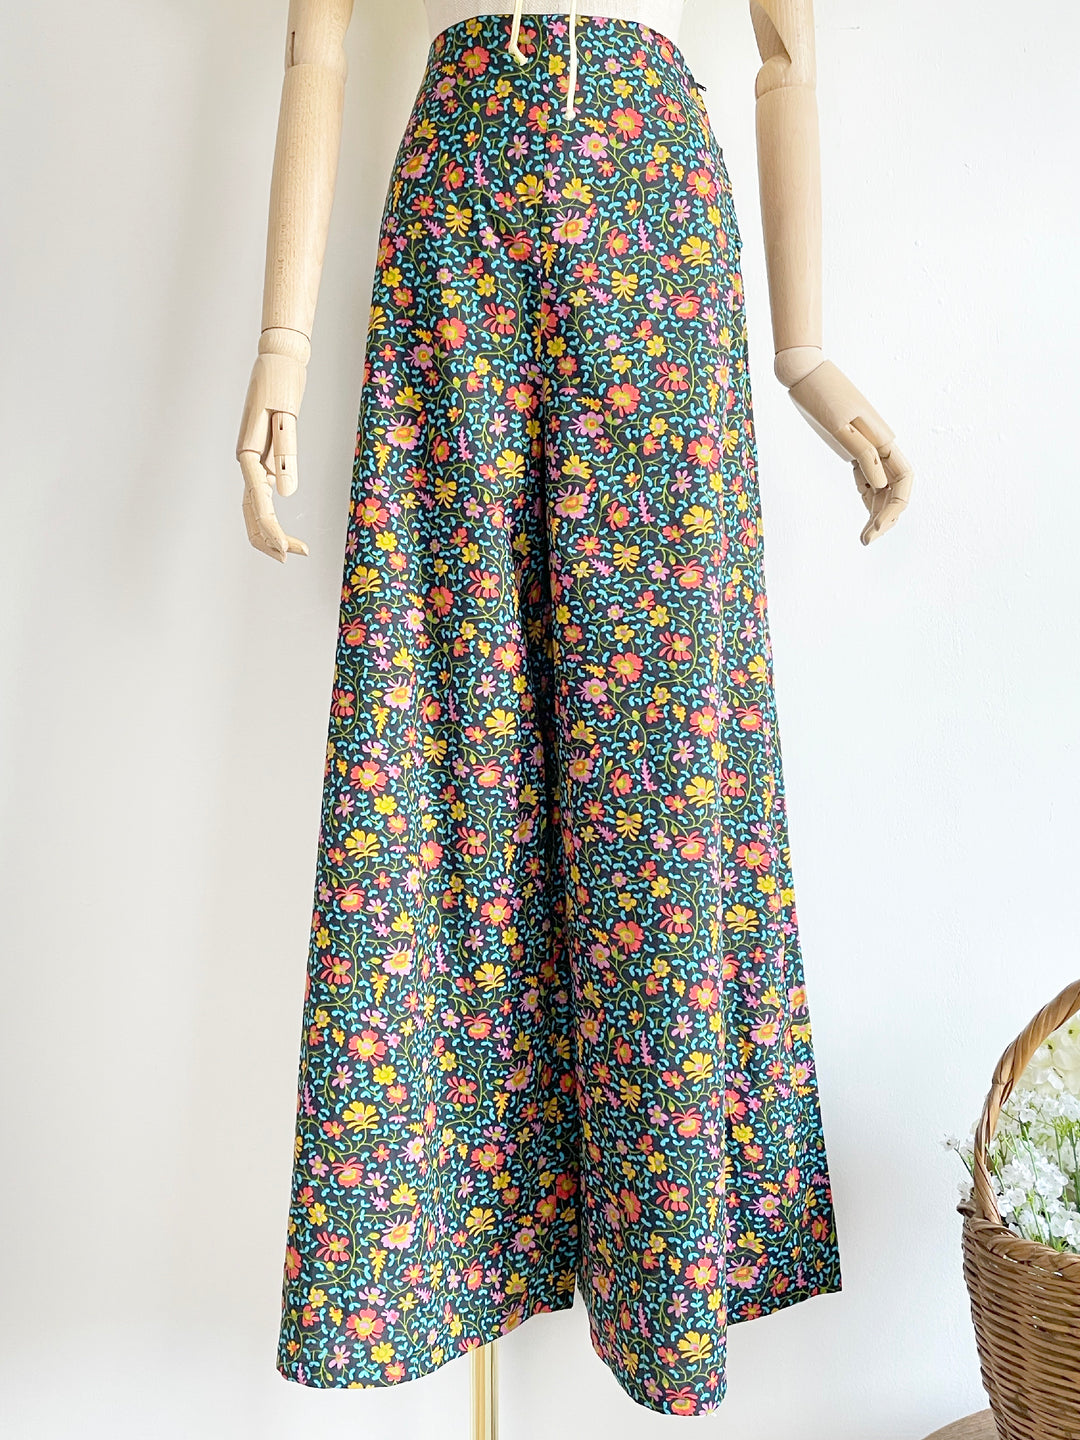 The Bring Me Flowers Trousers